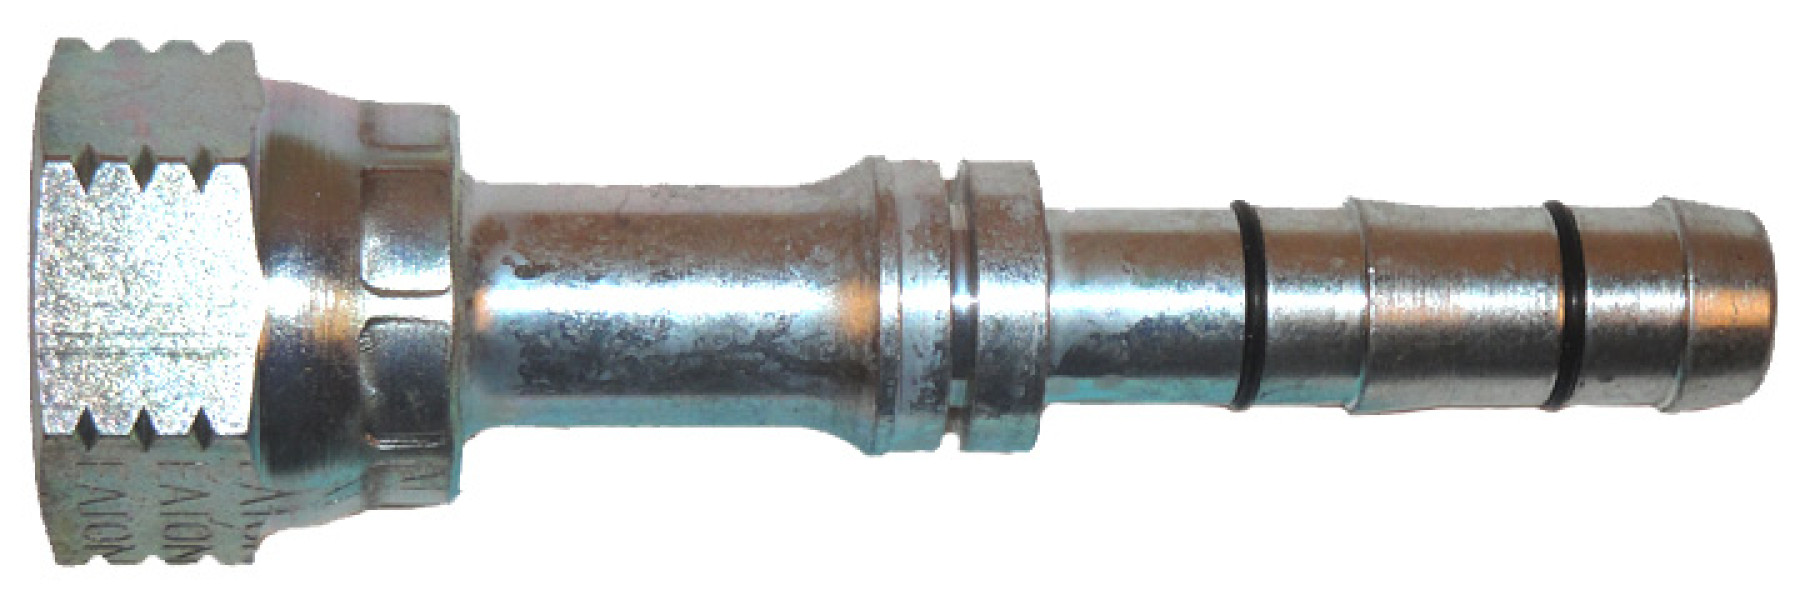 Image of A/C Refrigerant Hose Fitting from Sunair. Part number: GA23911-6-6